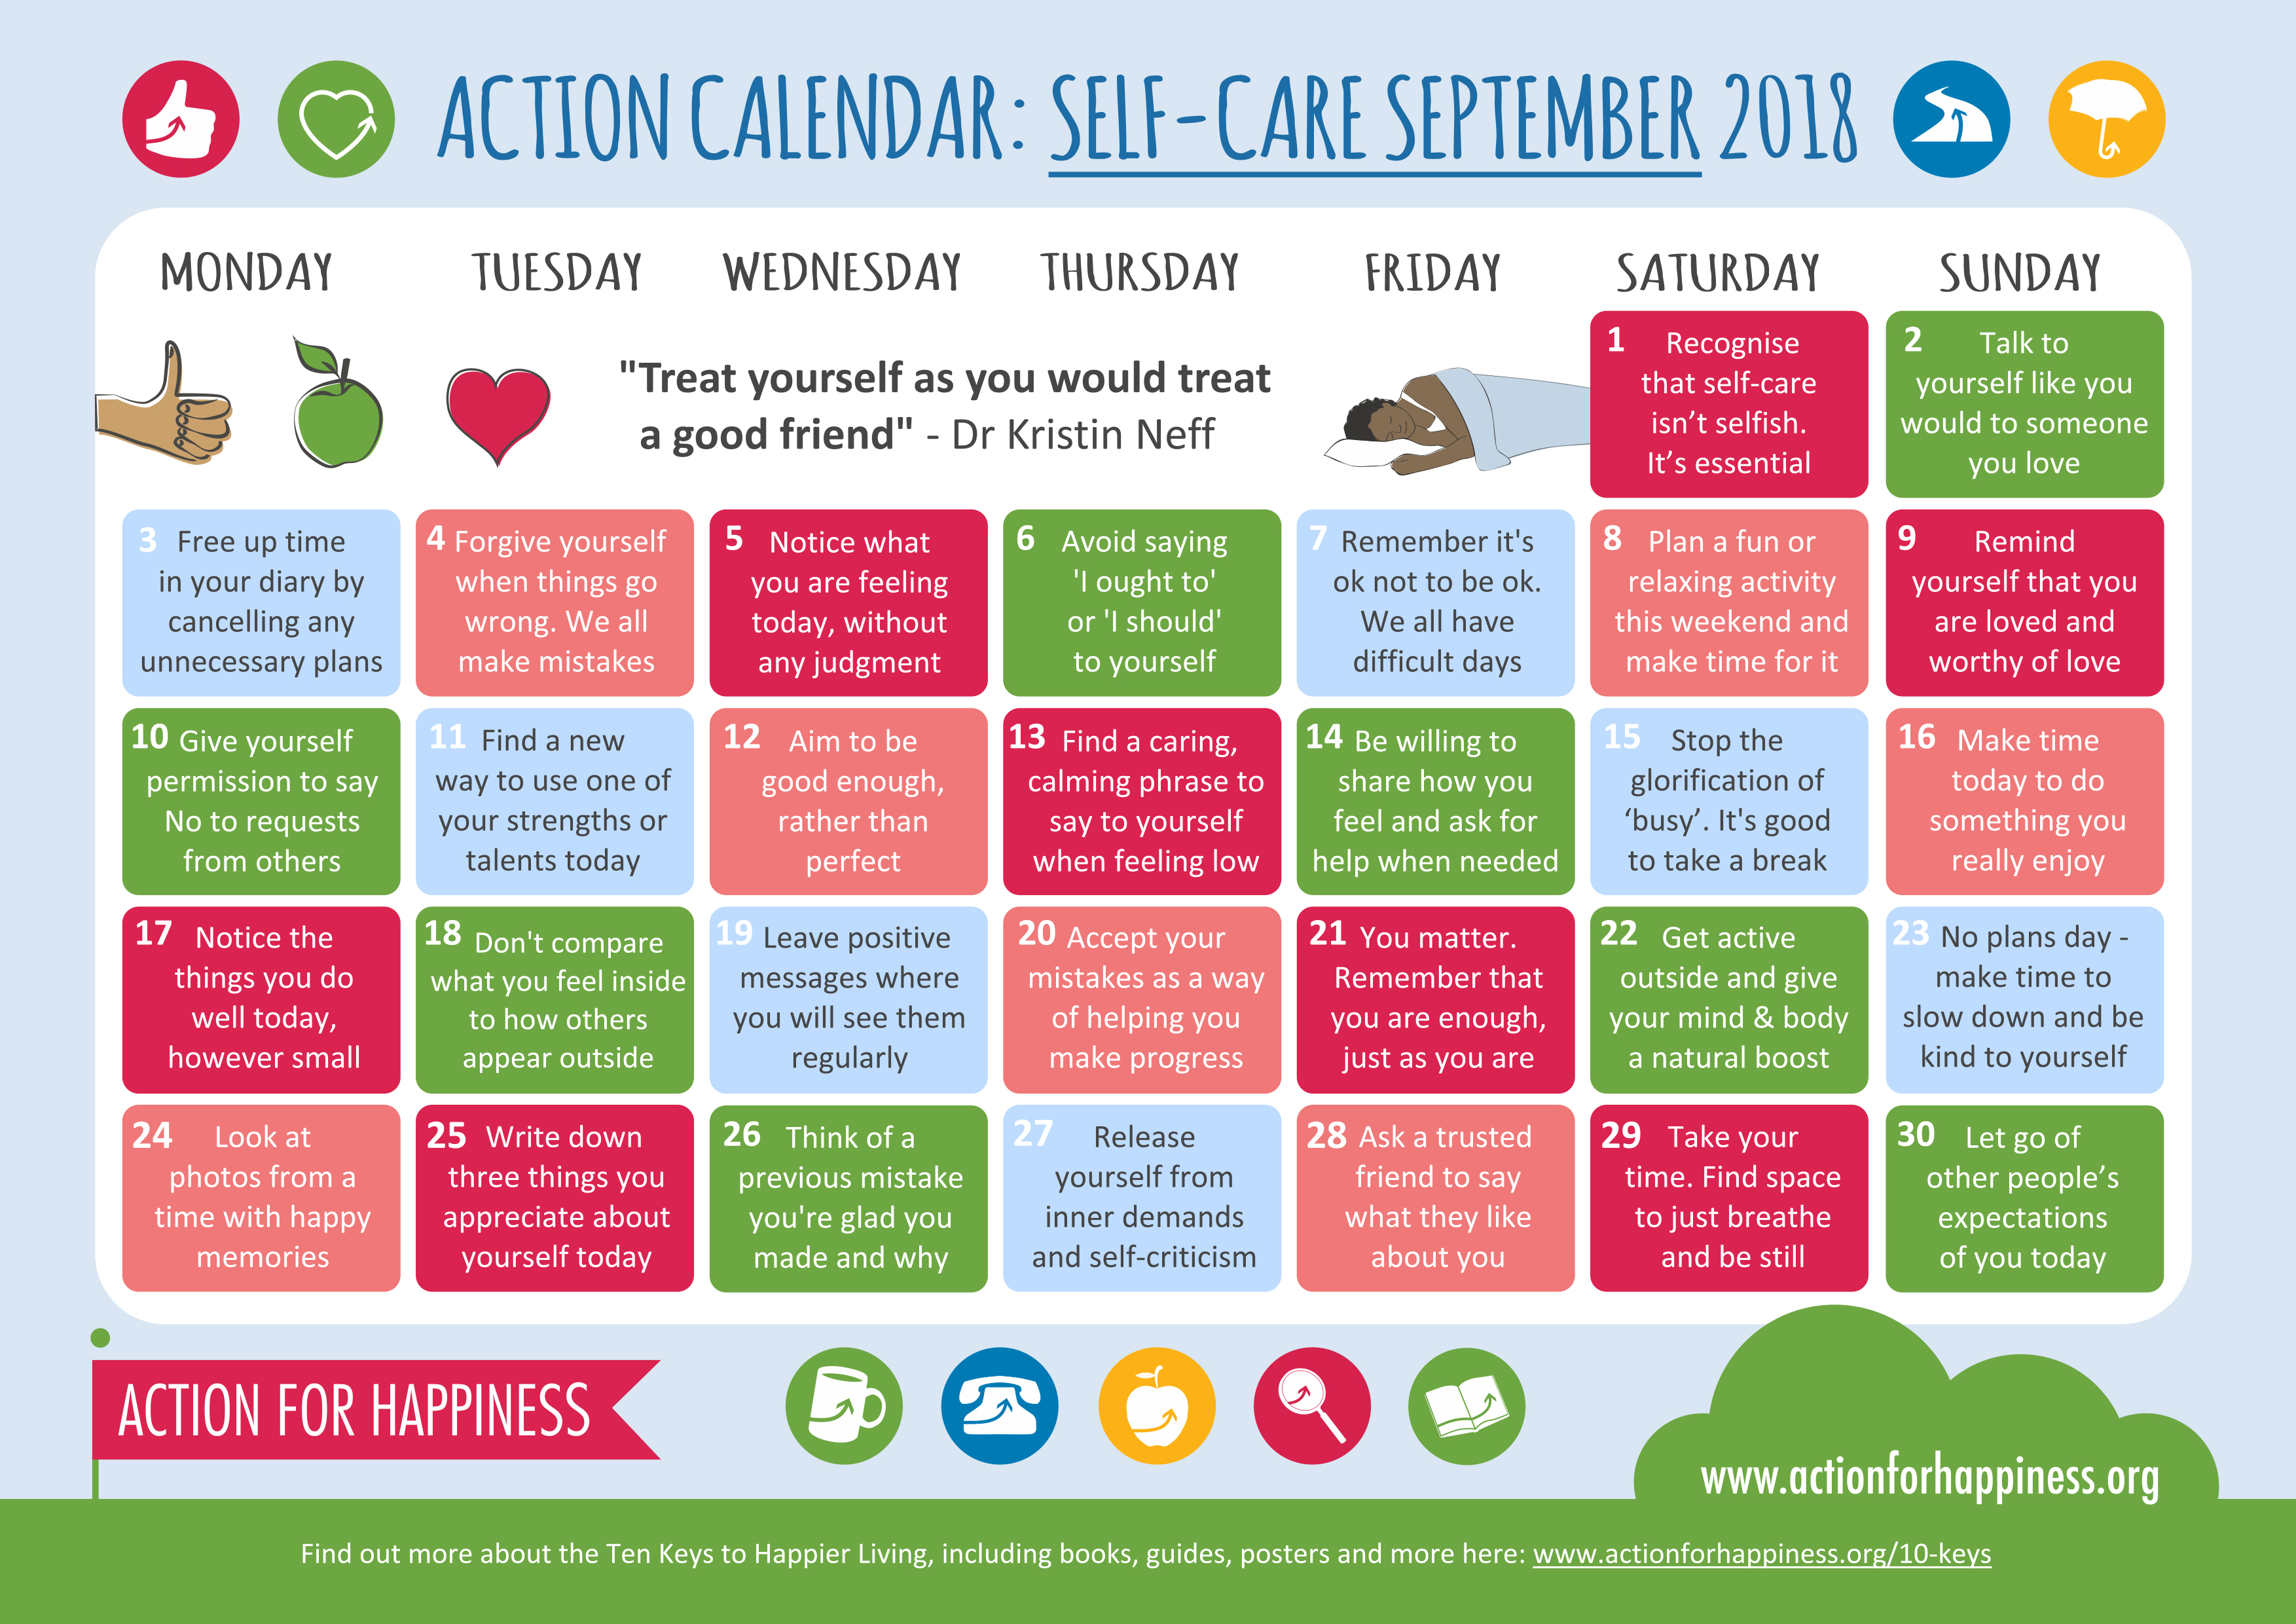 Action for Happiness Calendar SADDLEWORTH LIFE